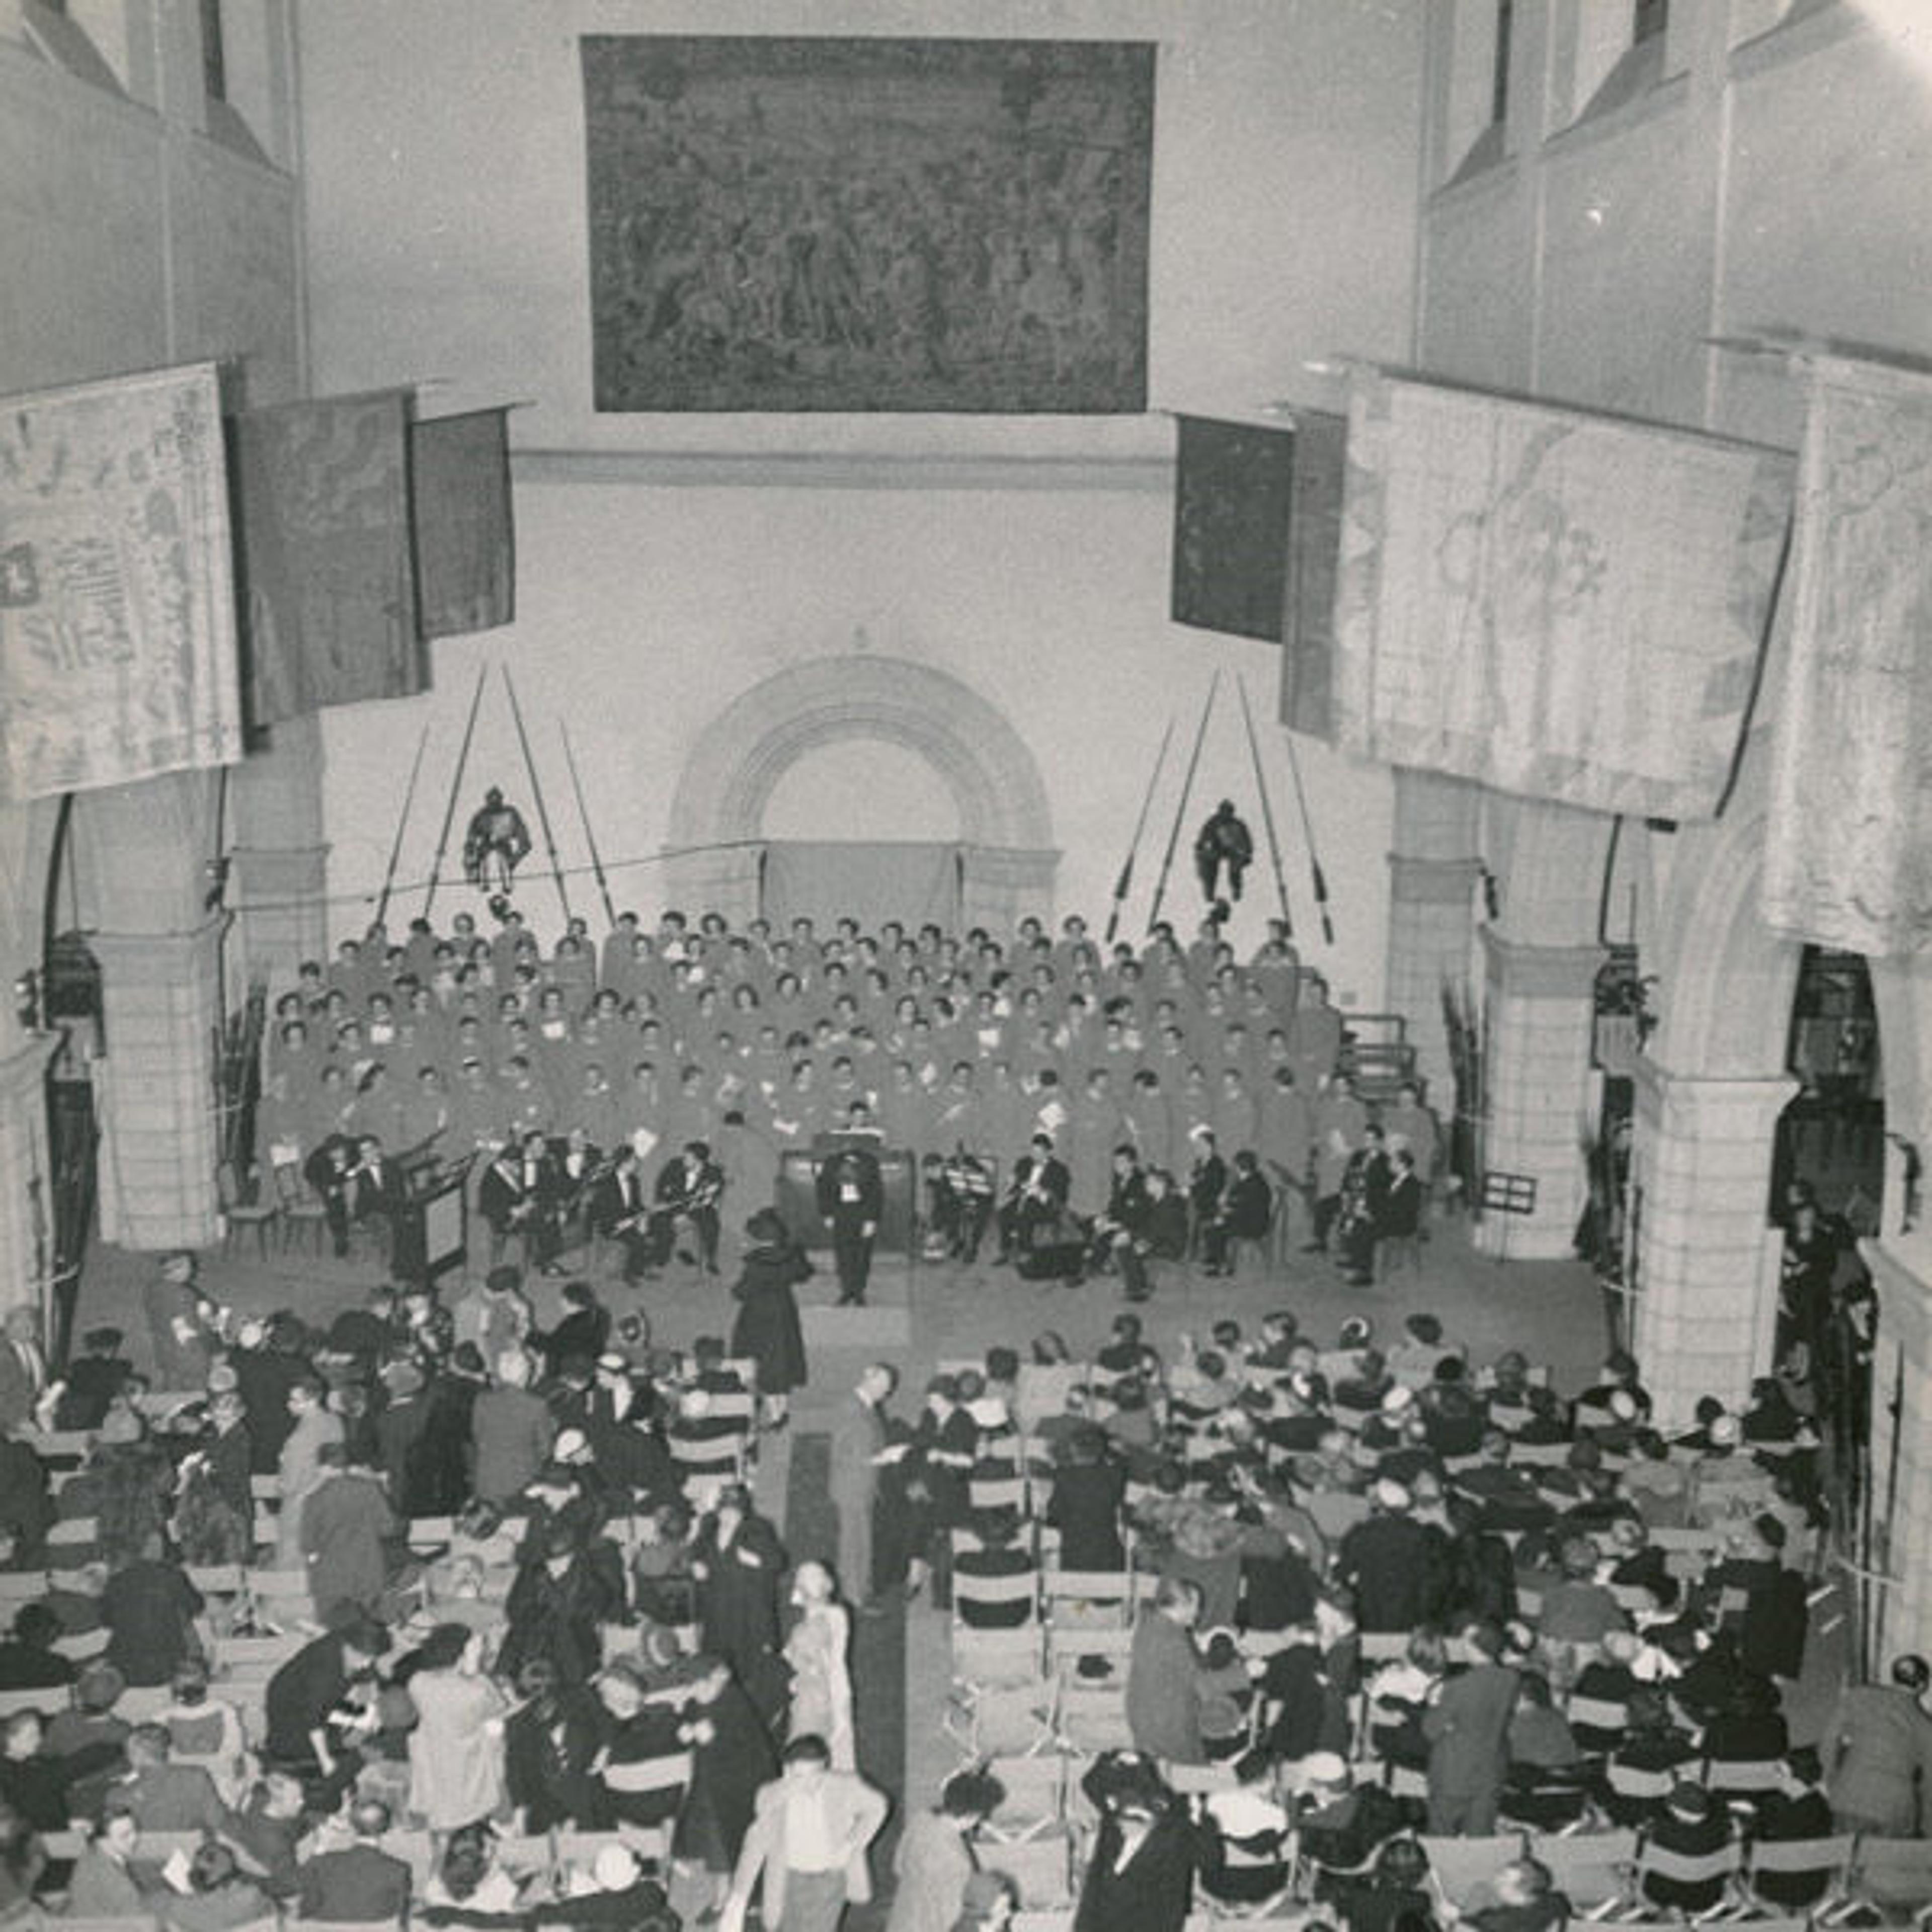 The Dessoff Choir performed for several Member concerts beginning in 1944, including here in the Arms and Armor Court, on April 27, 1950, when their program included works by Perotinus and Guillaume de Machaut.